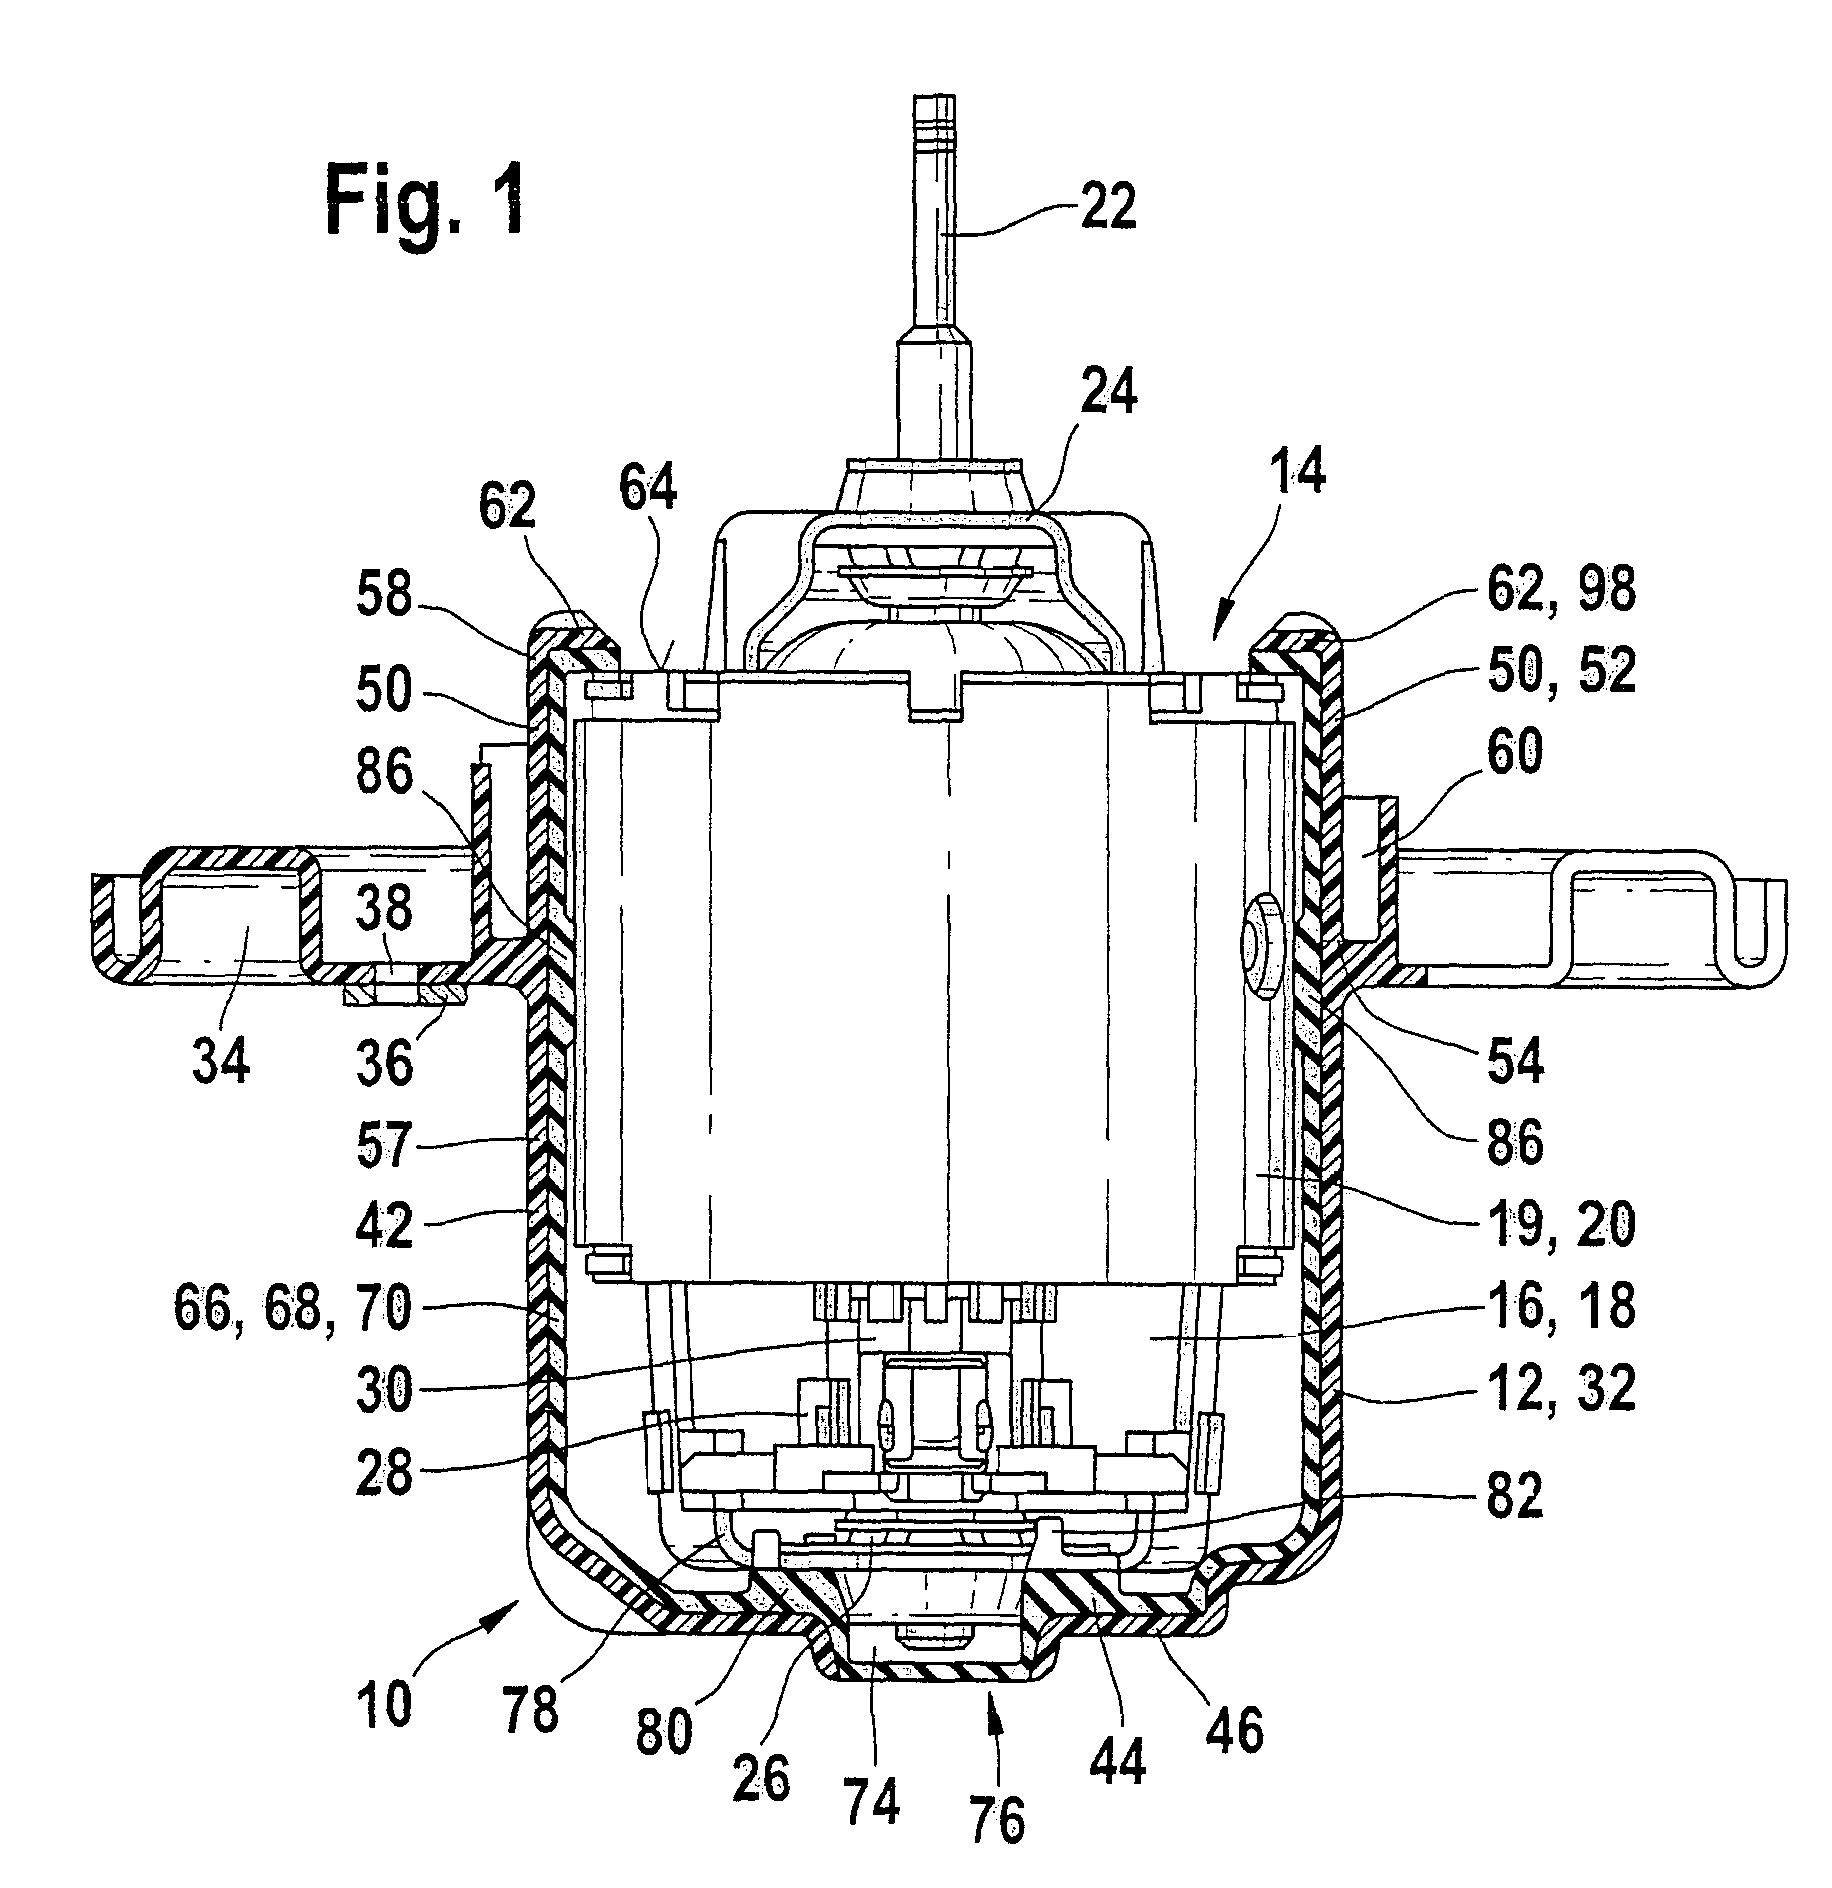 Receptacle housing for mounting a fan motor to a carrier